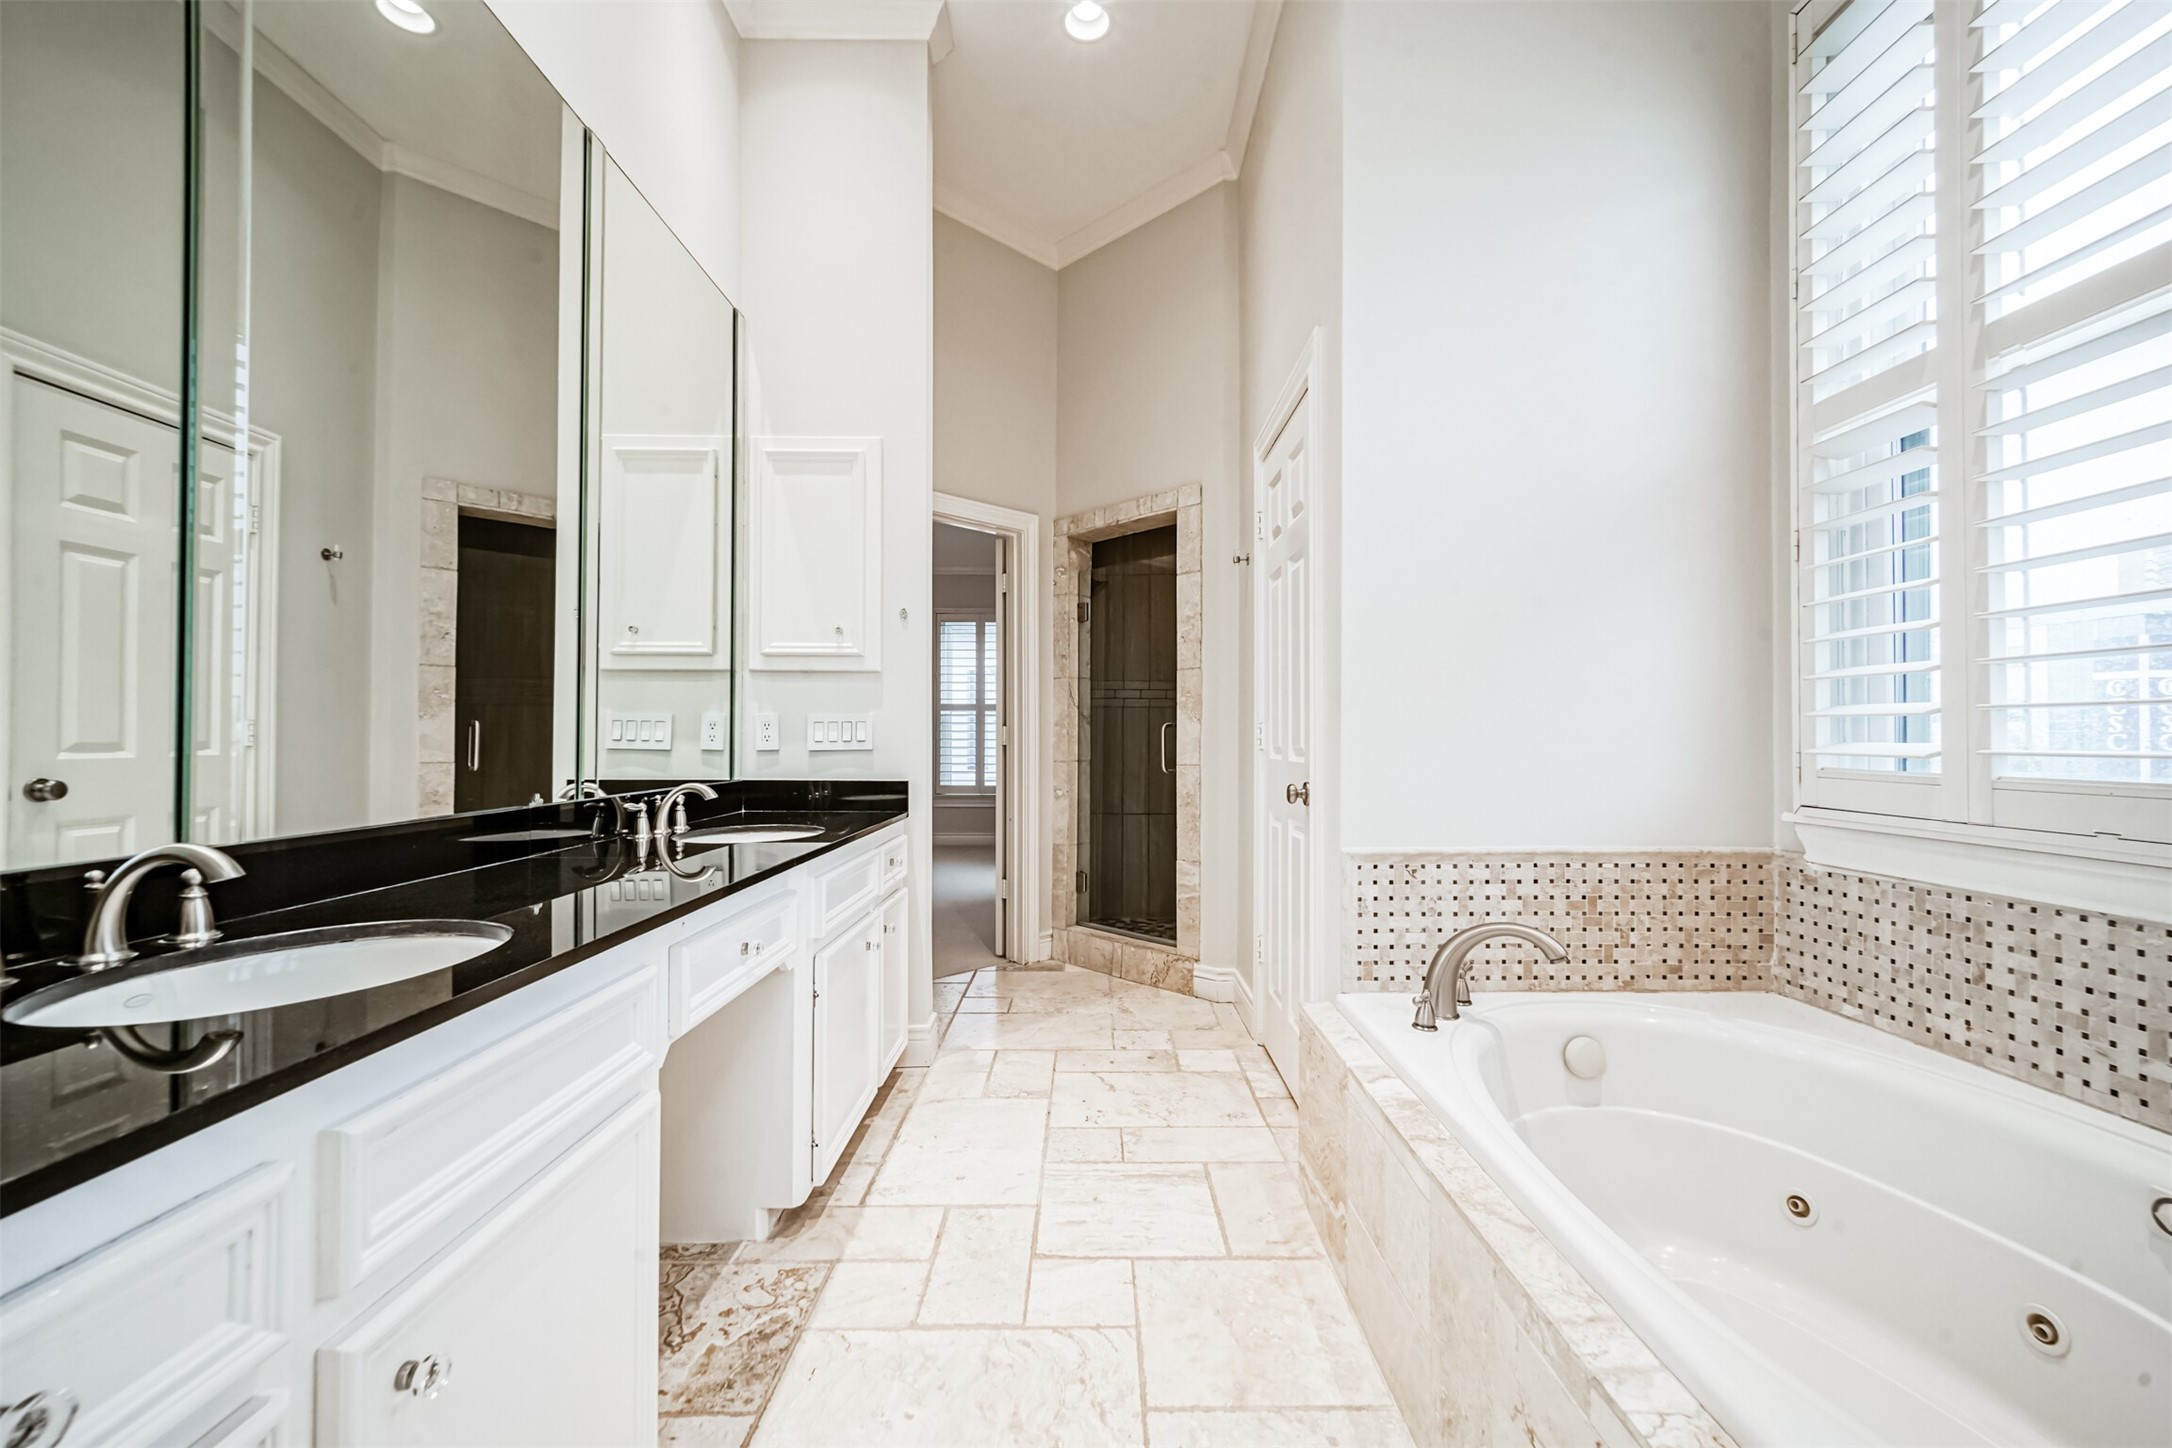 Luxurious Primary bath with double sinks, built in vanity area, large jetted tub, separate shower and water closet.